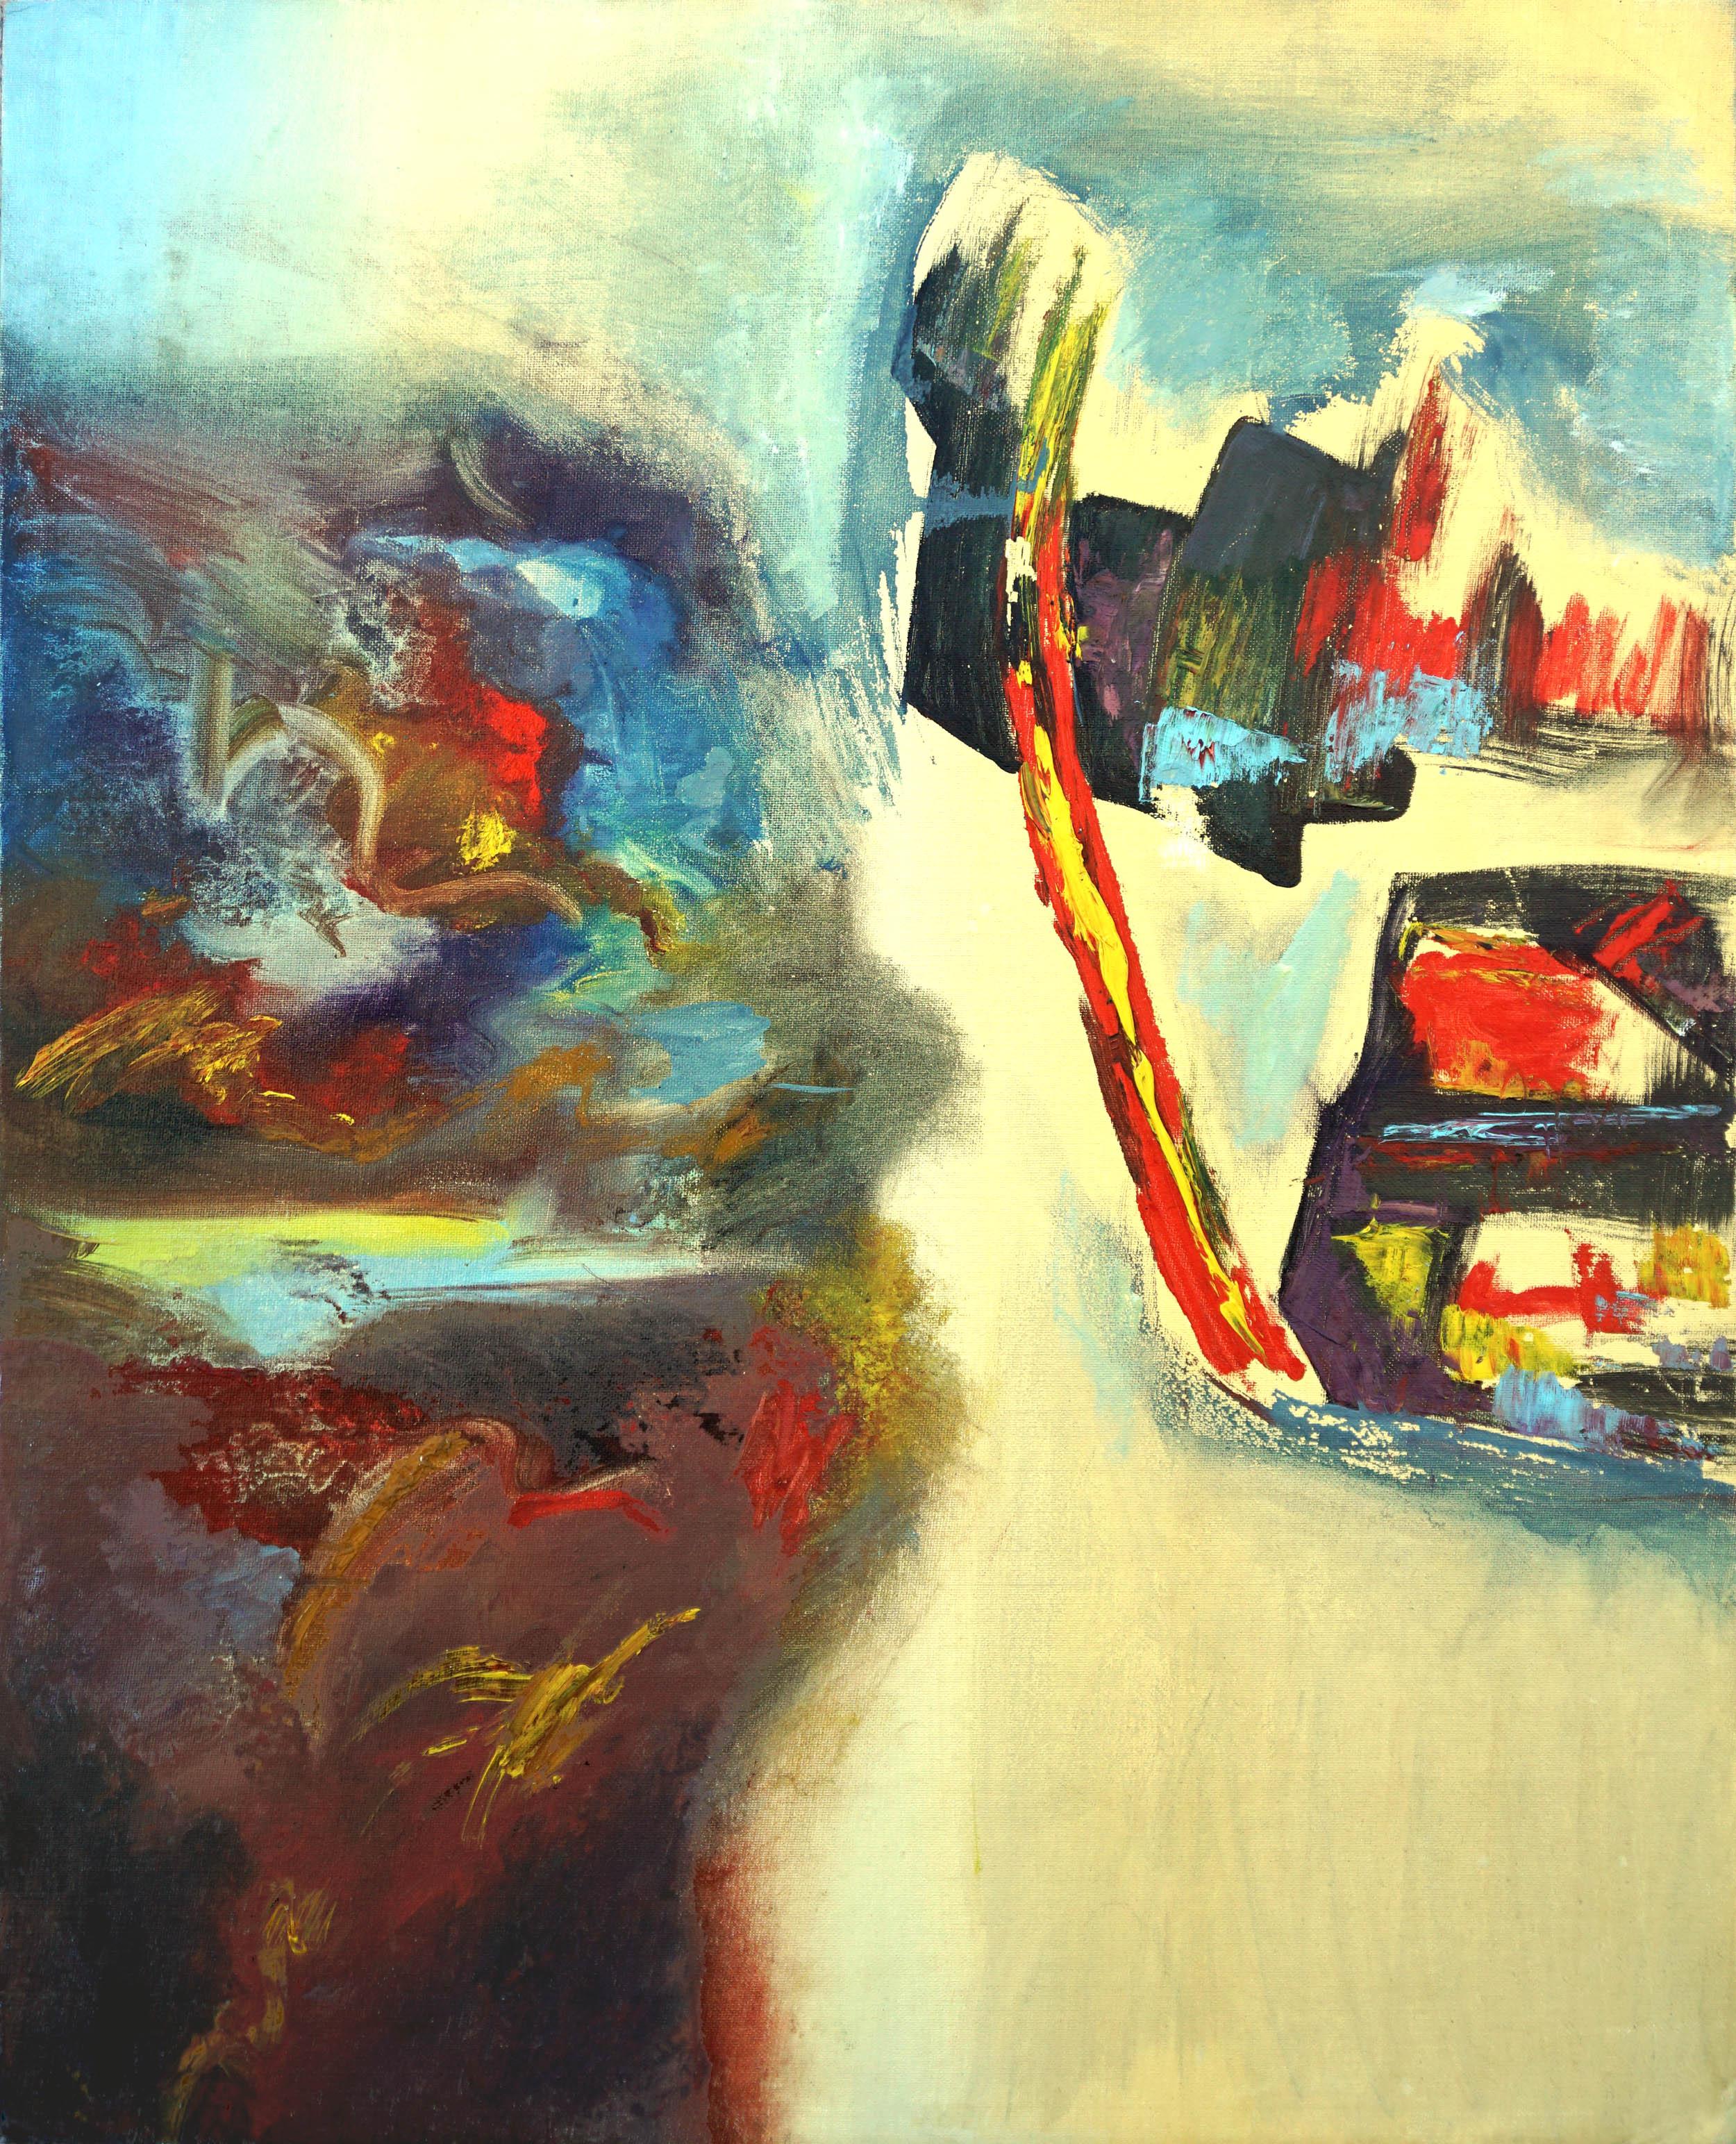  Abstract Expressionist Golden Gate Bridge and Coastal Highway